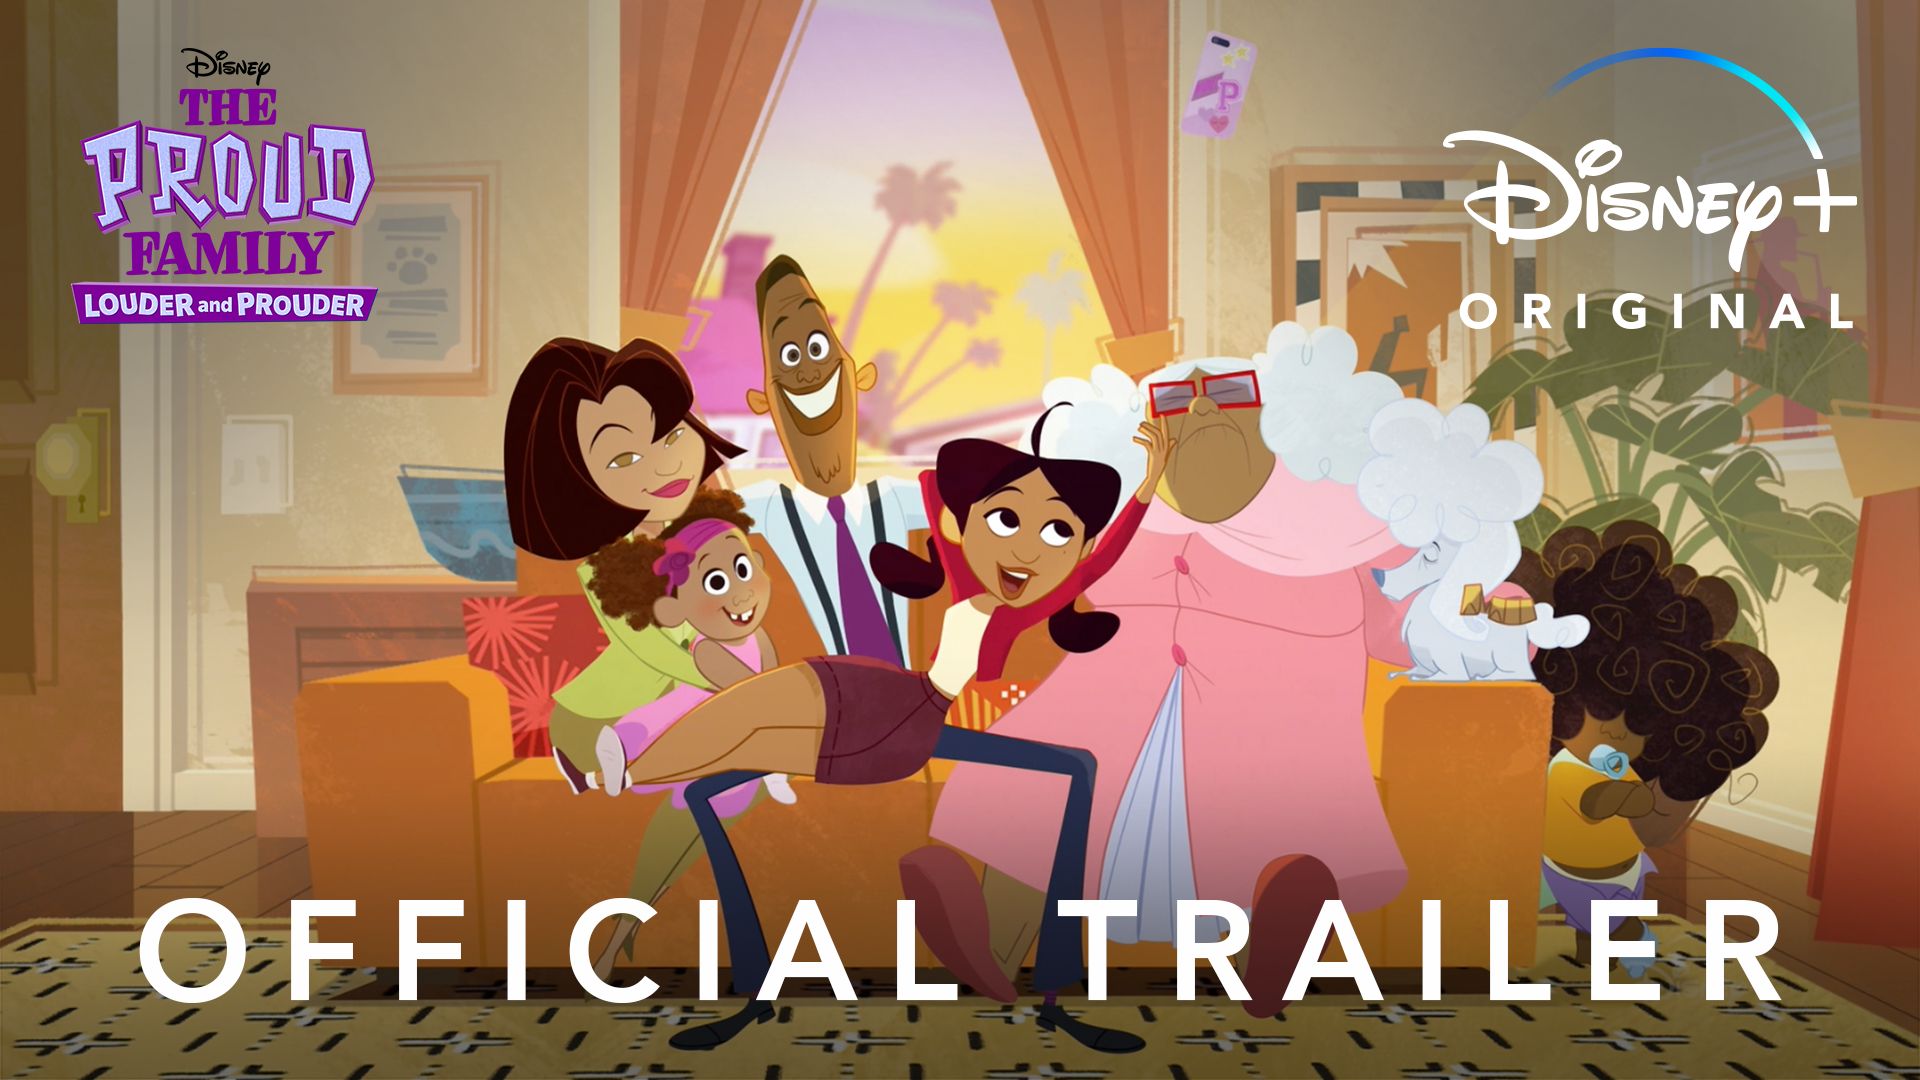 THE PROUD FAMILY: LOUDER AND PROUDER: TRAILER